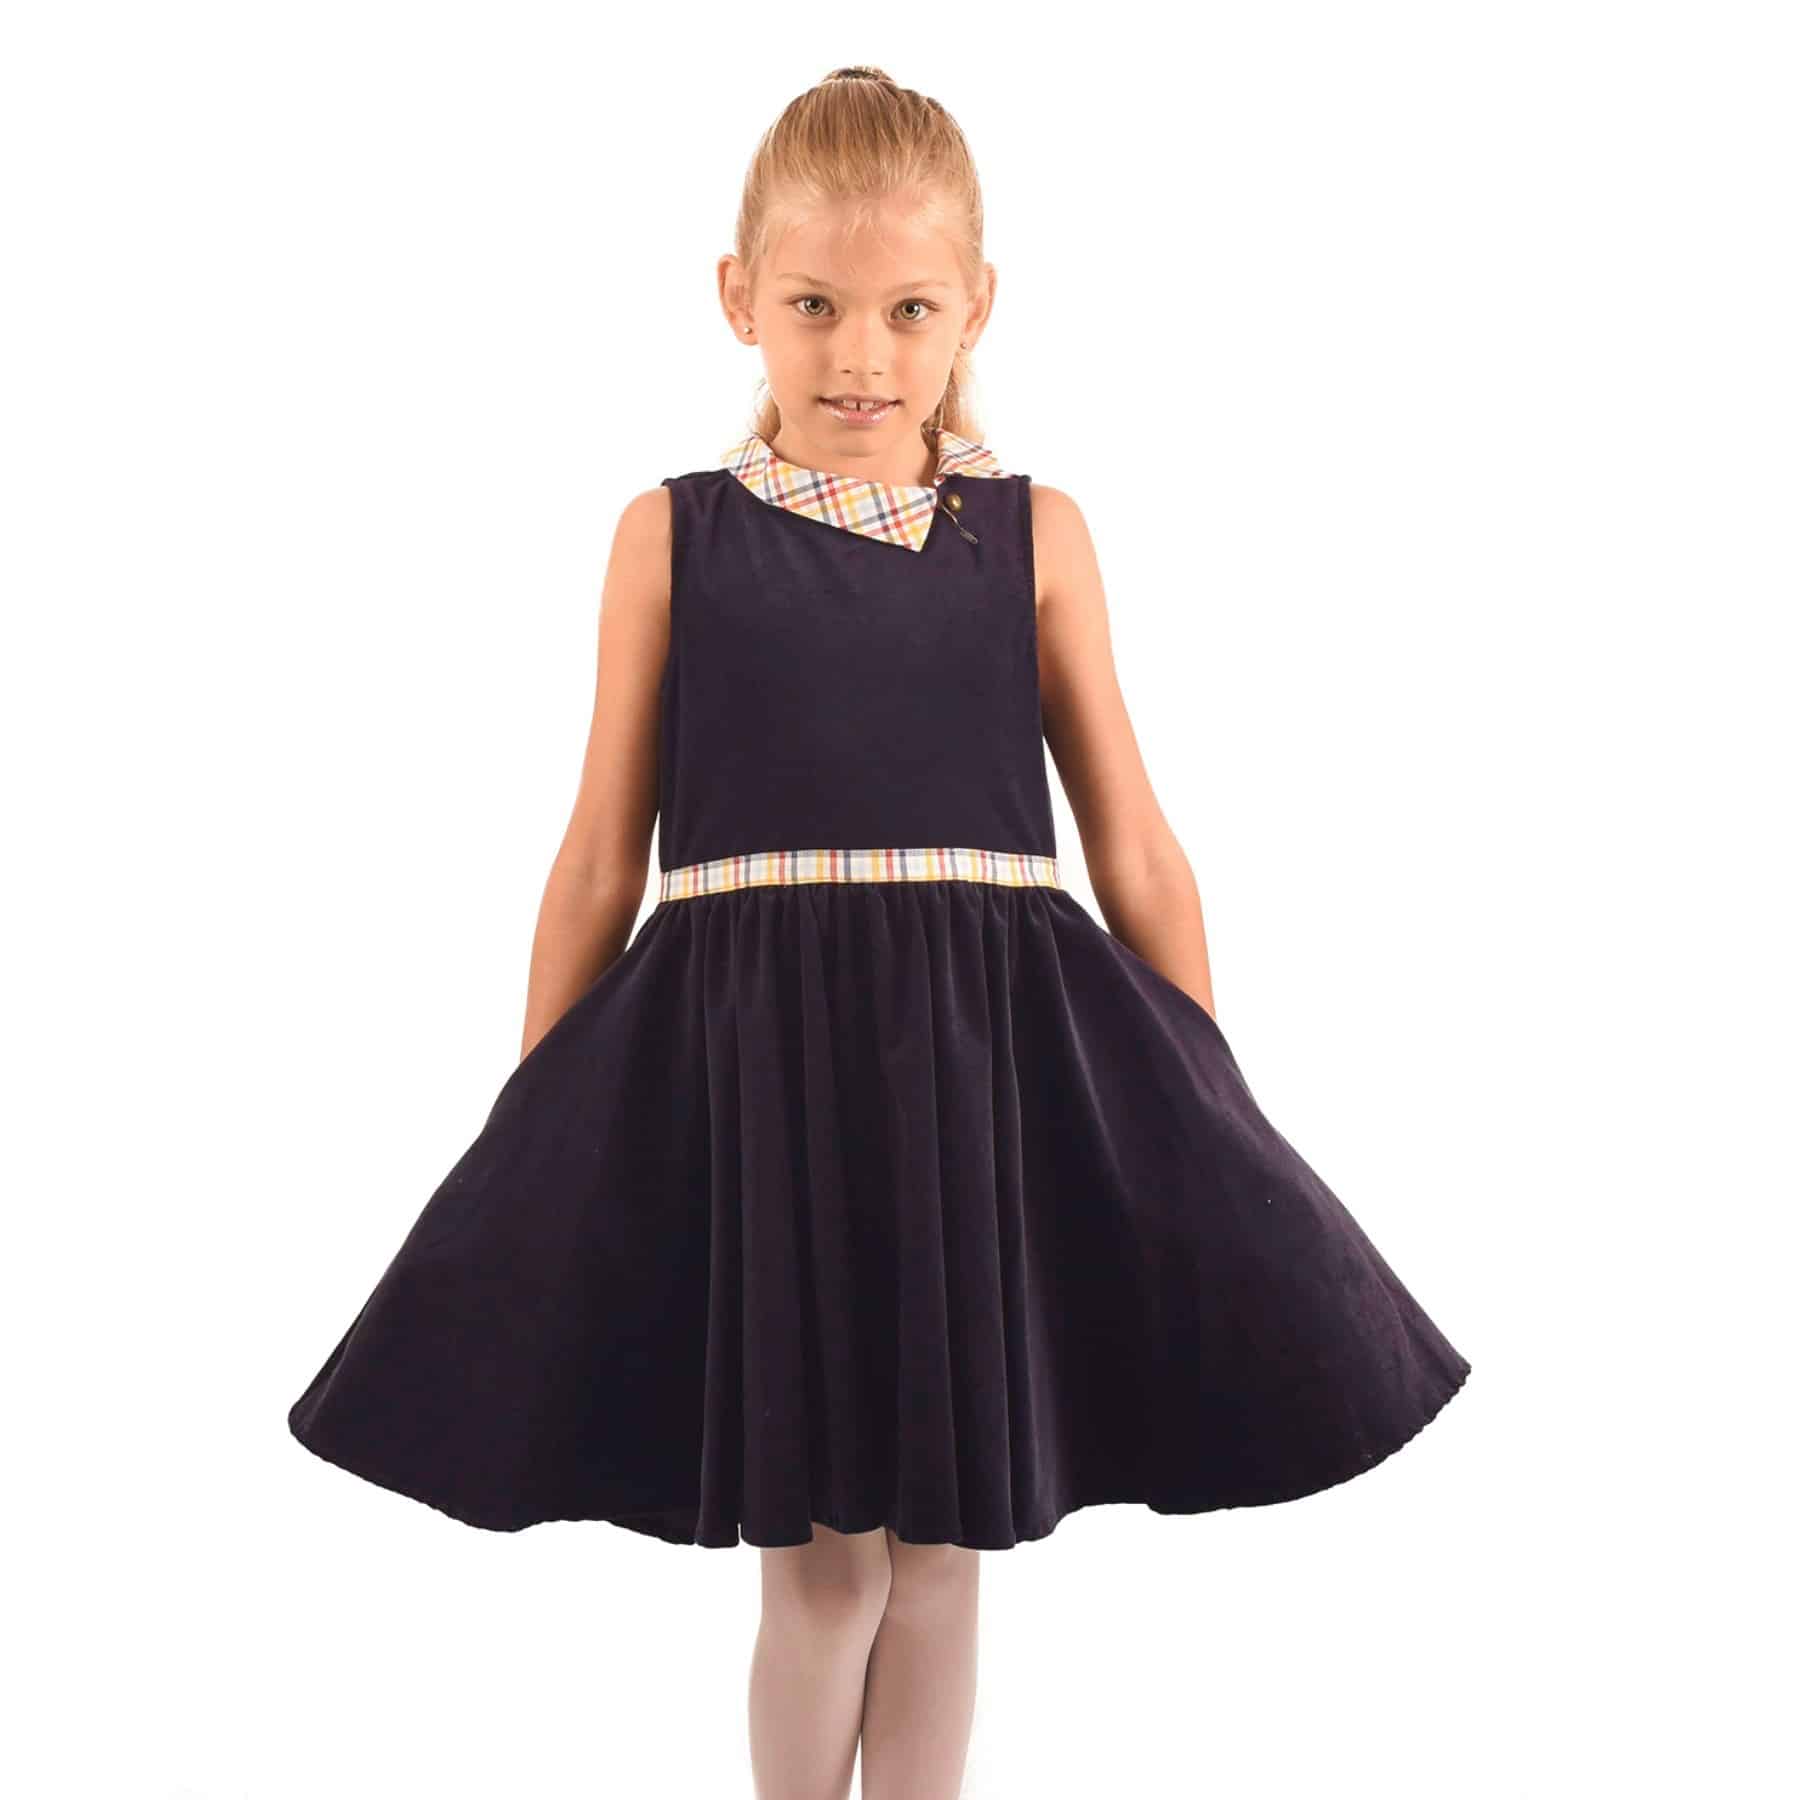 Cute spinning dress in navy blue velvet and pointed Claudine collar from the children's fashion brand La Faute à Voltaire